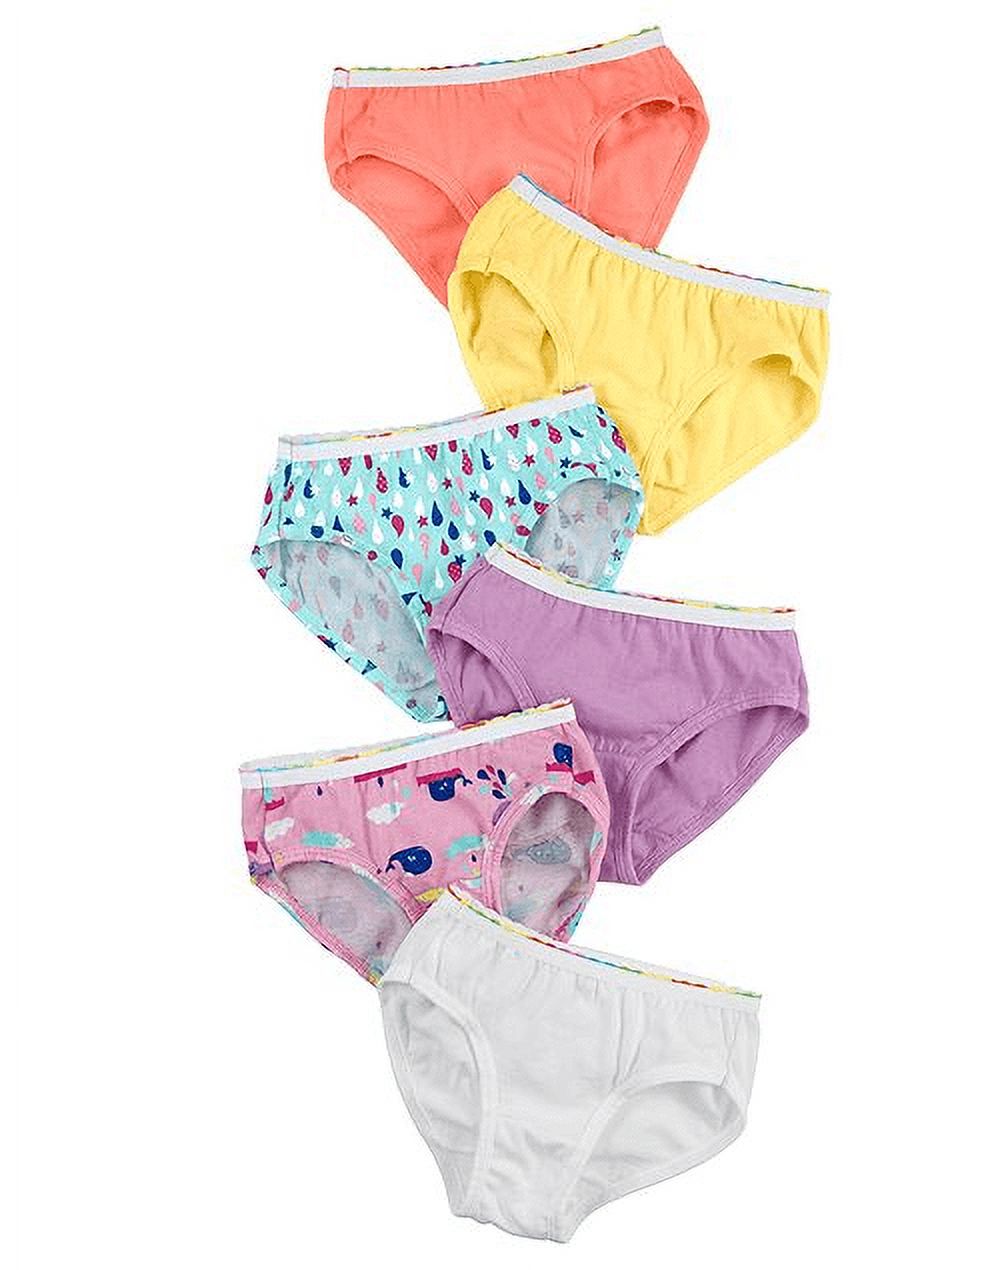 Hanes Toddler Girl Hipster Panty, 6 Pack, Sizes 2T-5T - image 1 of 4